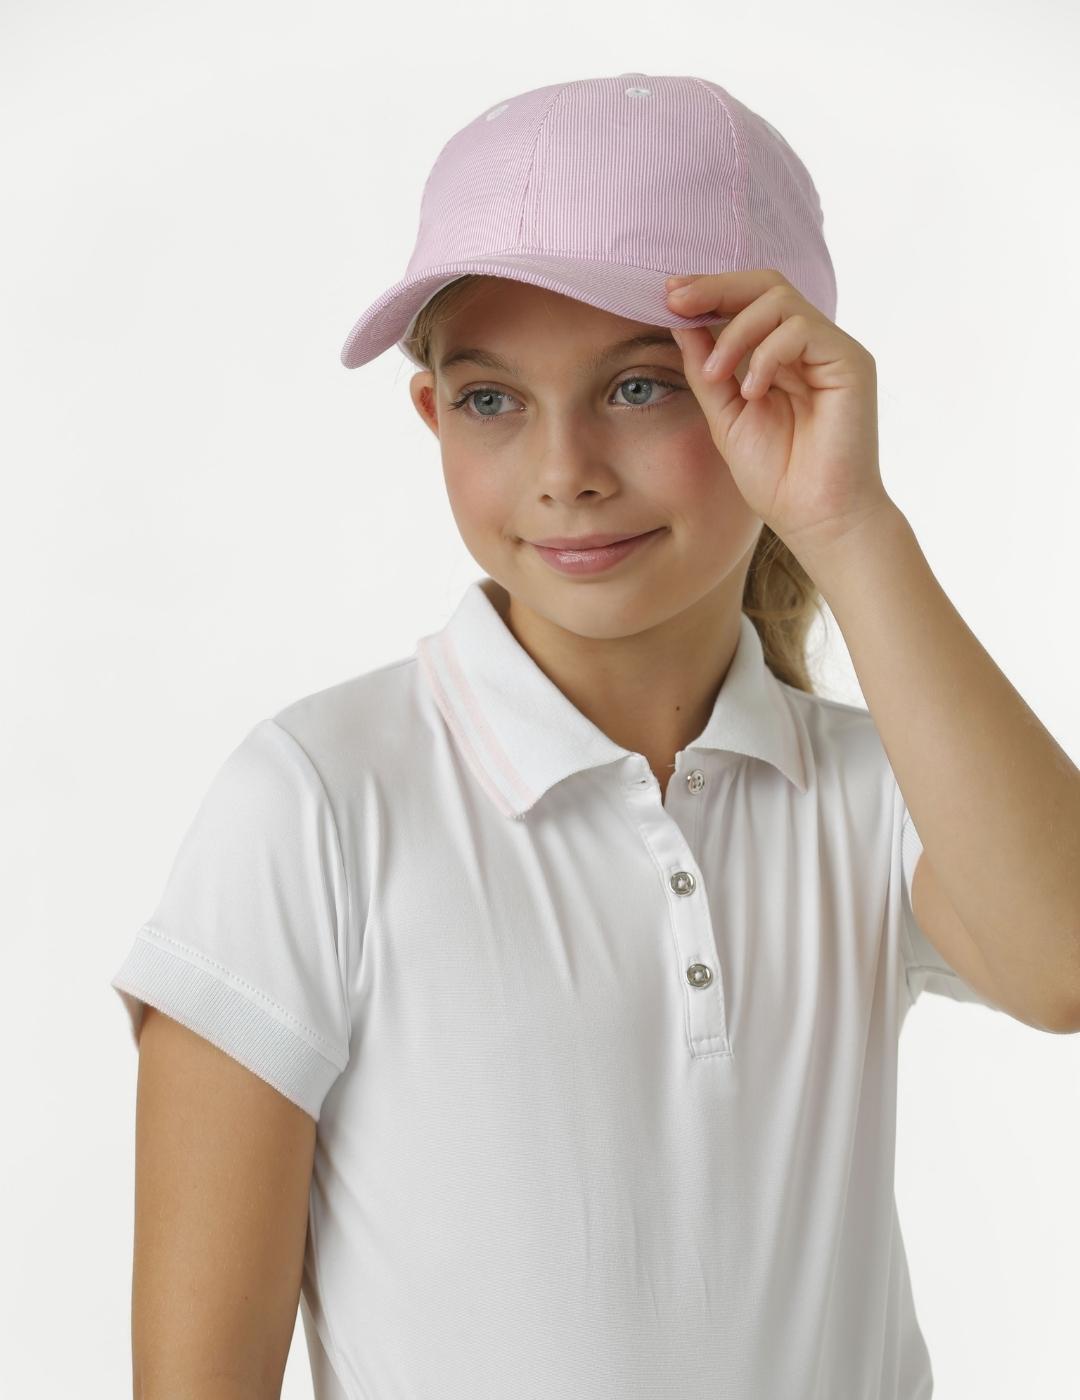 Harlow Youth Girls' Polo